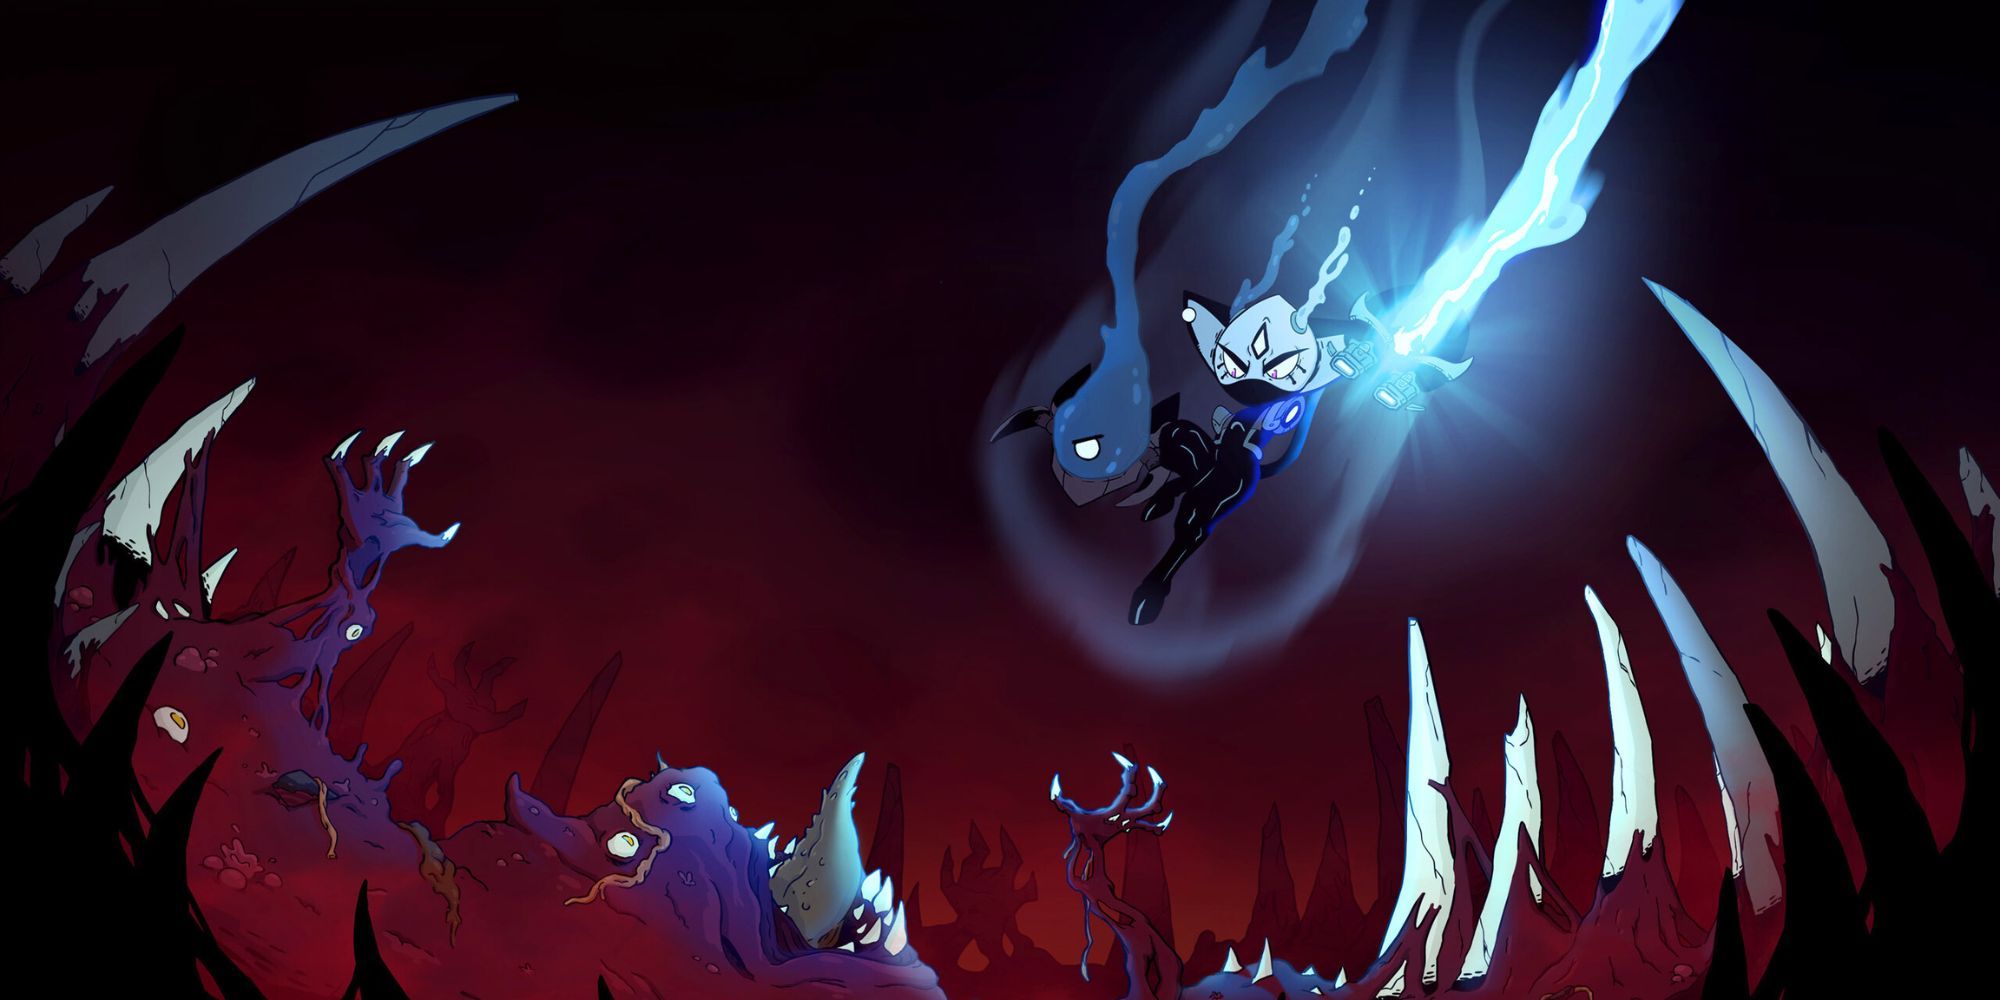 Key art for Biomorph showing Harlo attacking an enemy from above